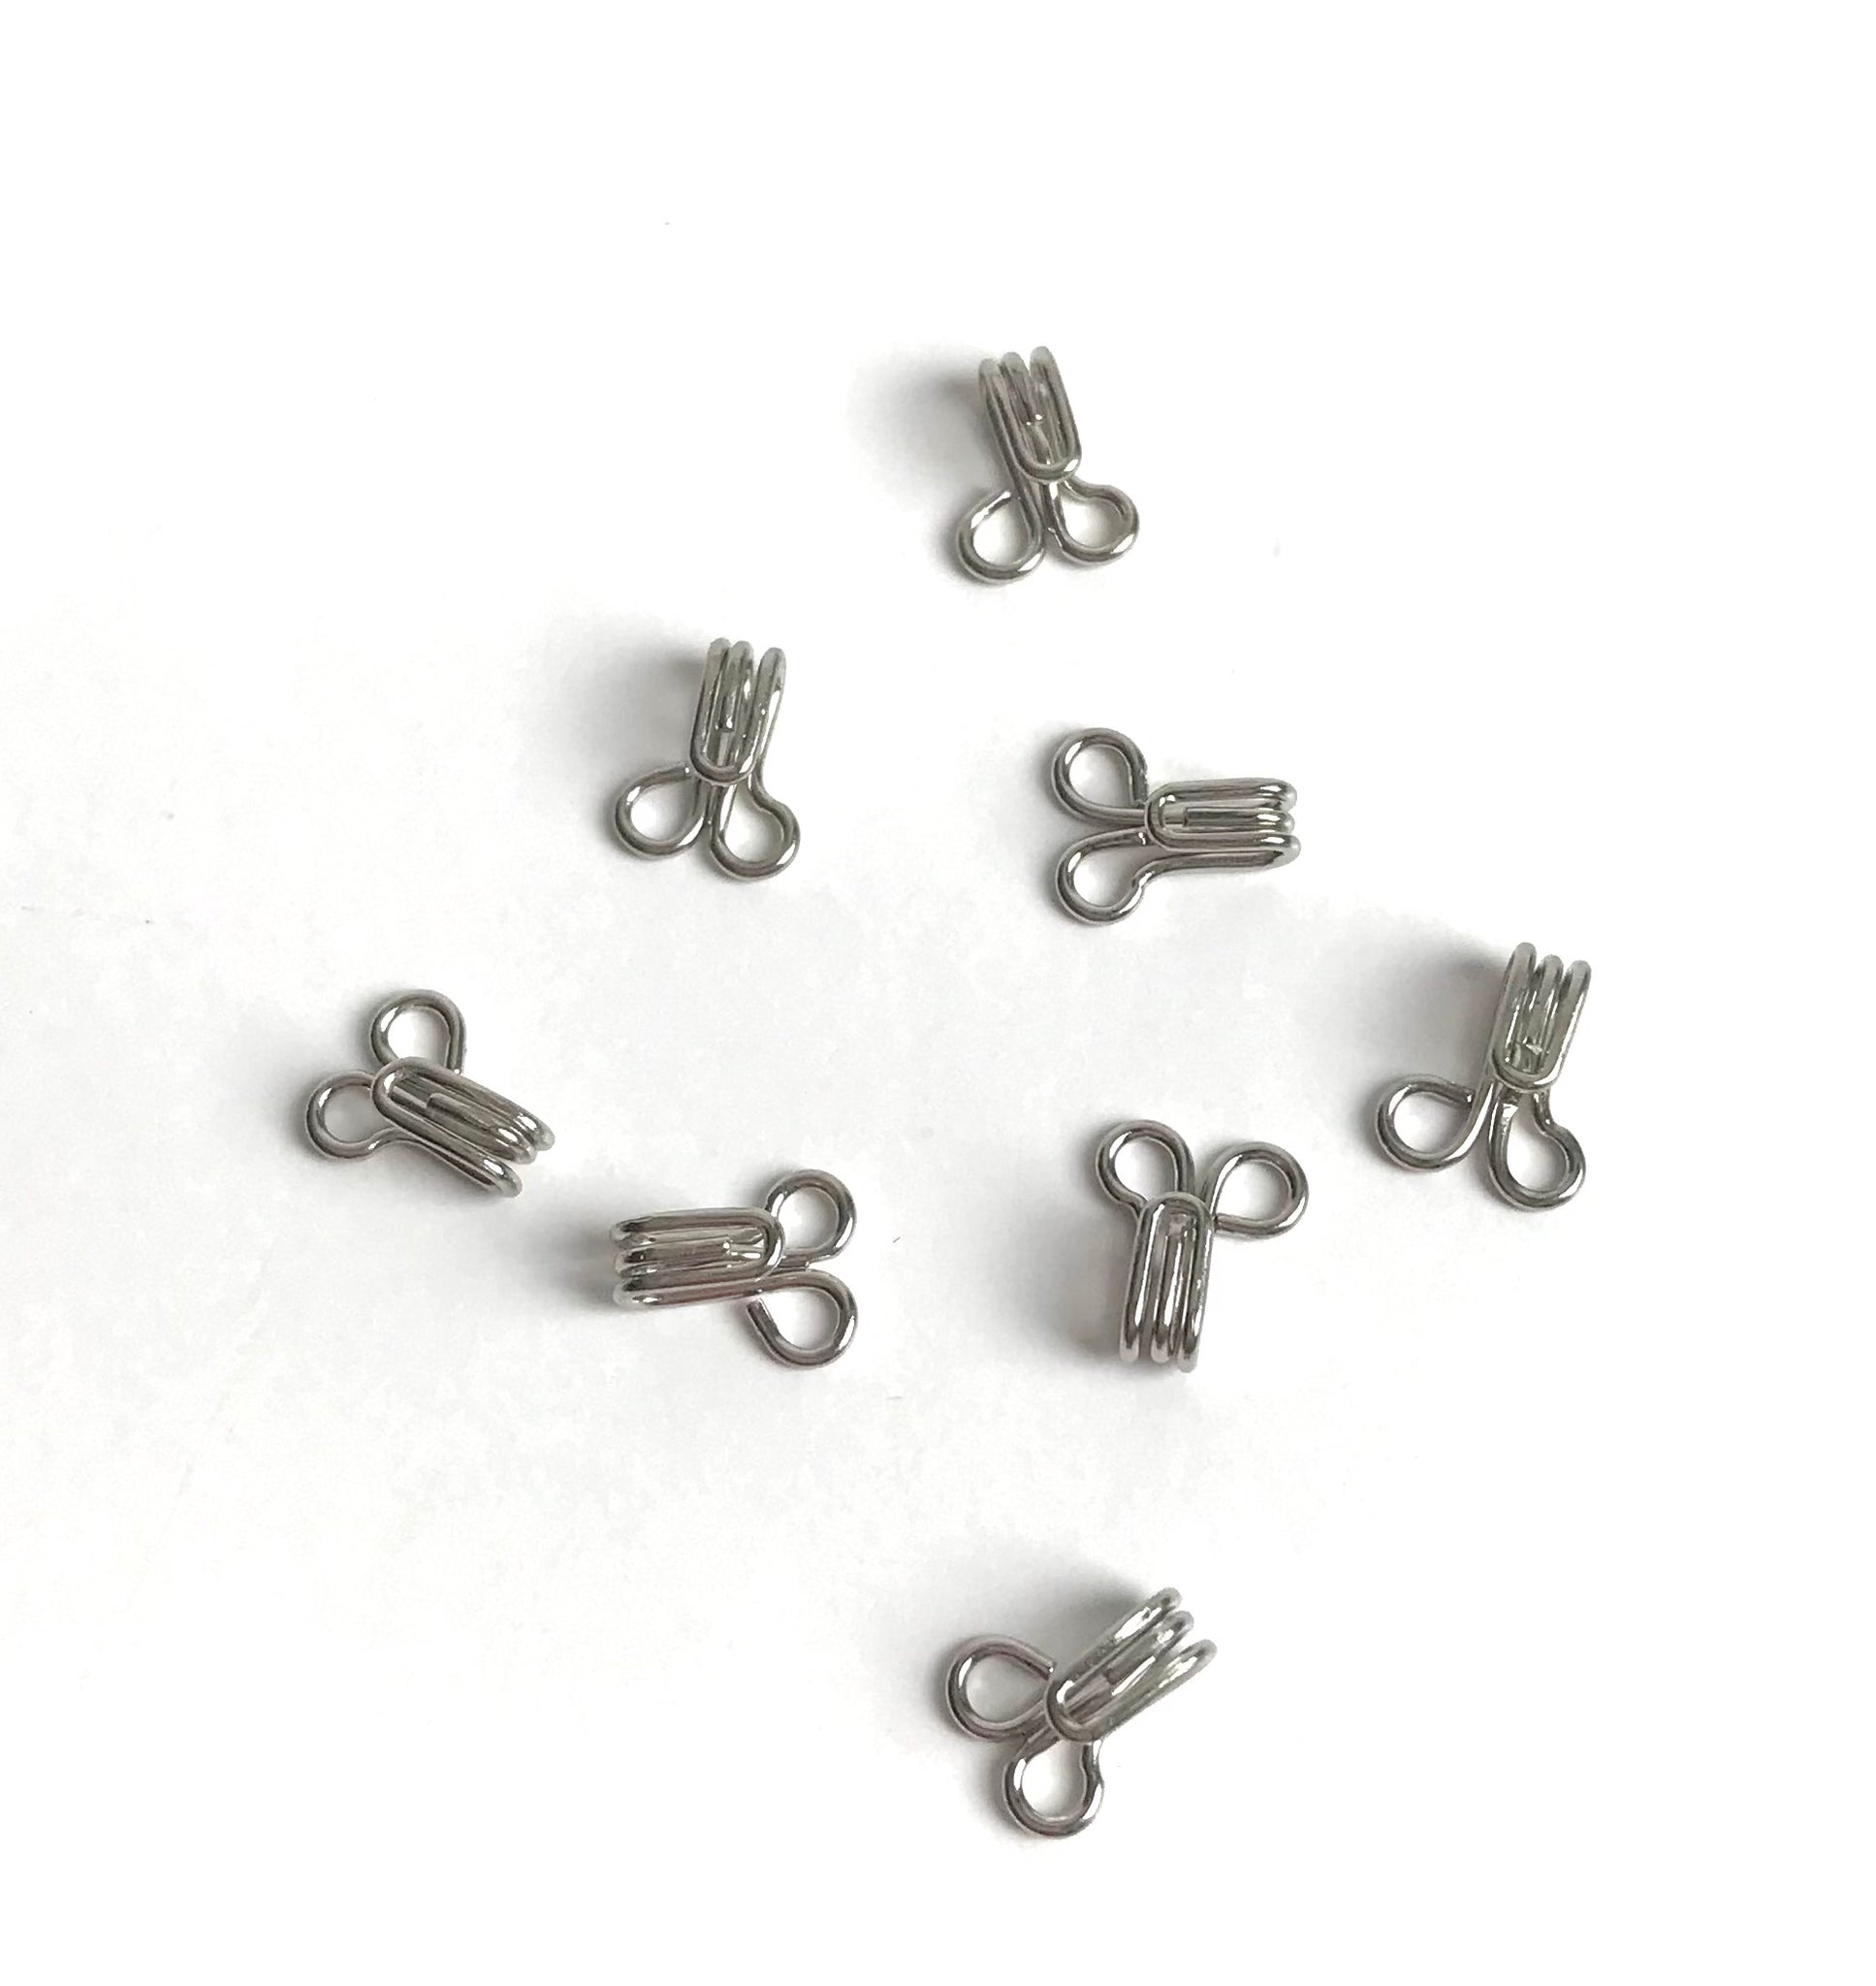 Sewing Hooks and Eyes Hook and Eye Closure Metal Hook and Eye Fasteners Metal Bra Hook and Eye Nickel Hook and Eye Closure Bra Pack of 4